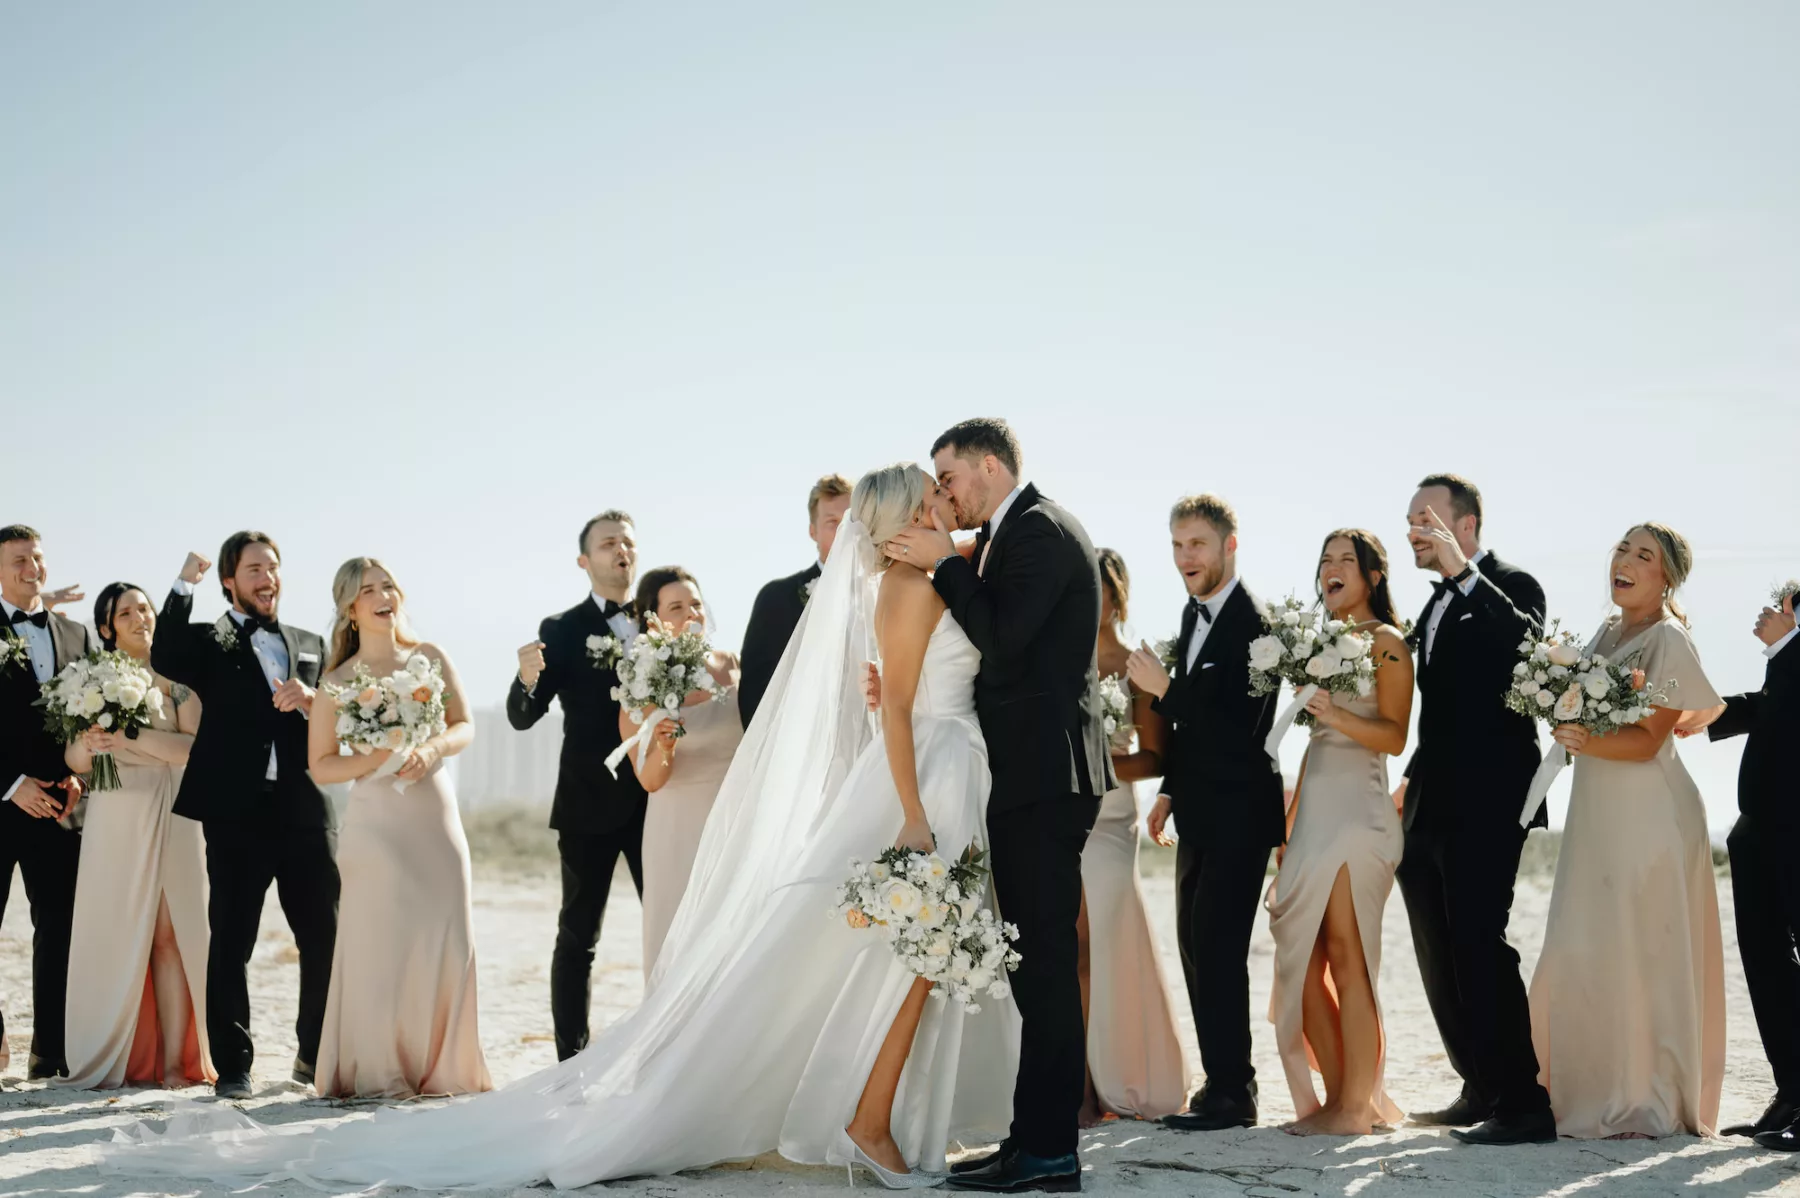 Romantic Bride and Groom Beach Wedding Portrait | Clearwater Photographer and Videographer J&S Media | Tampa Bay Content Creator Behind The Vows